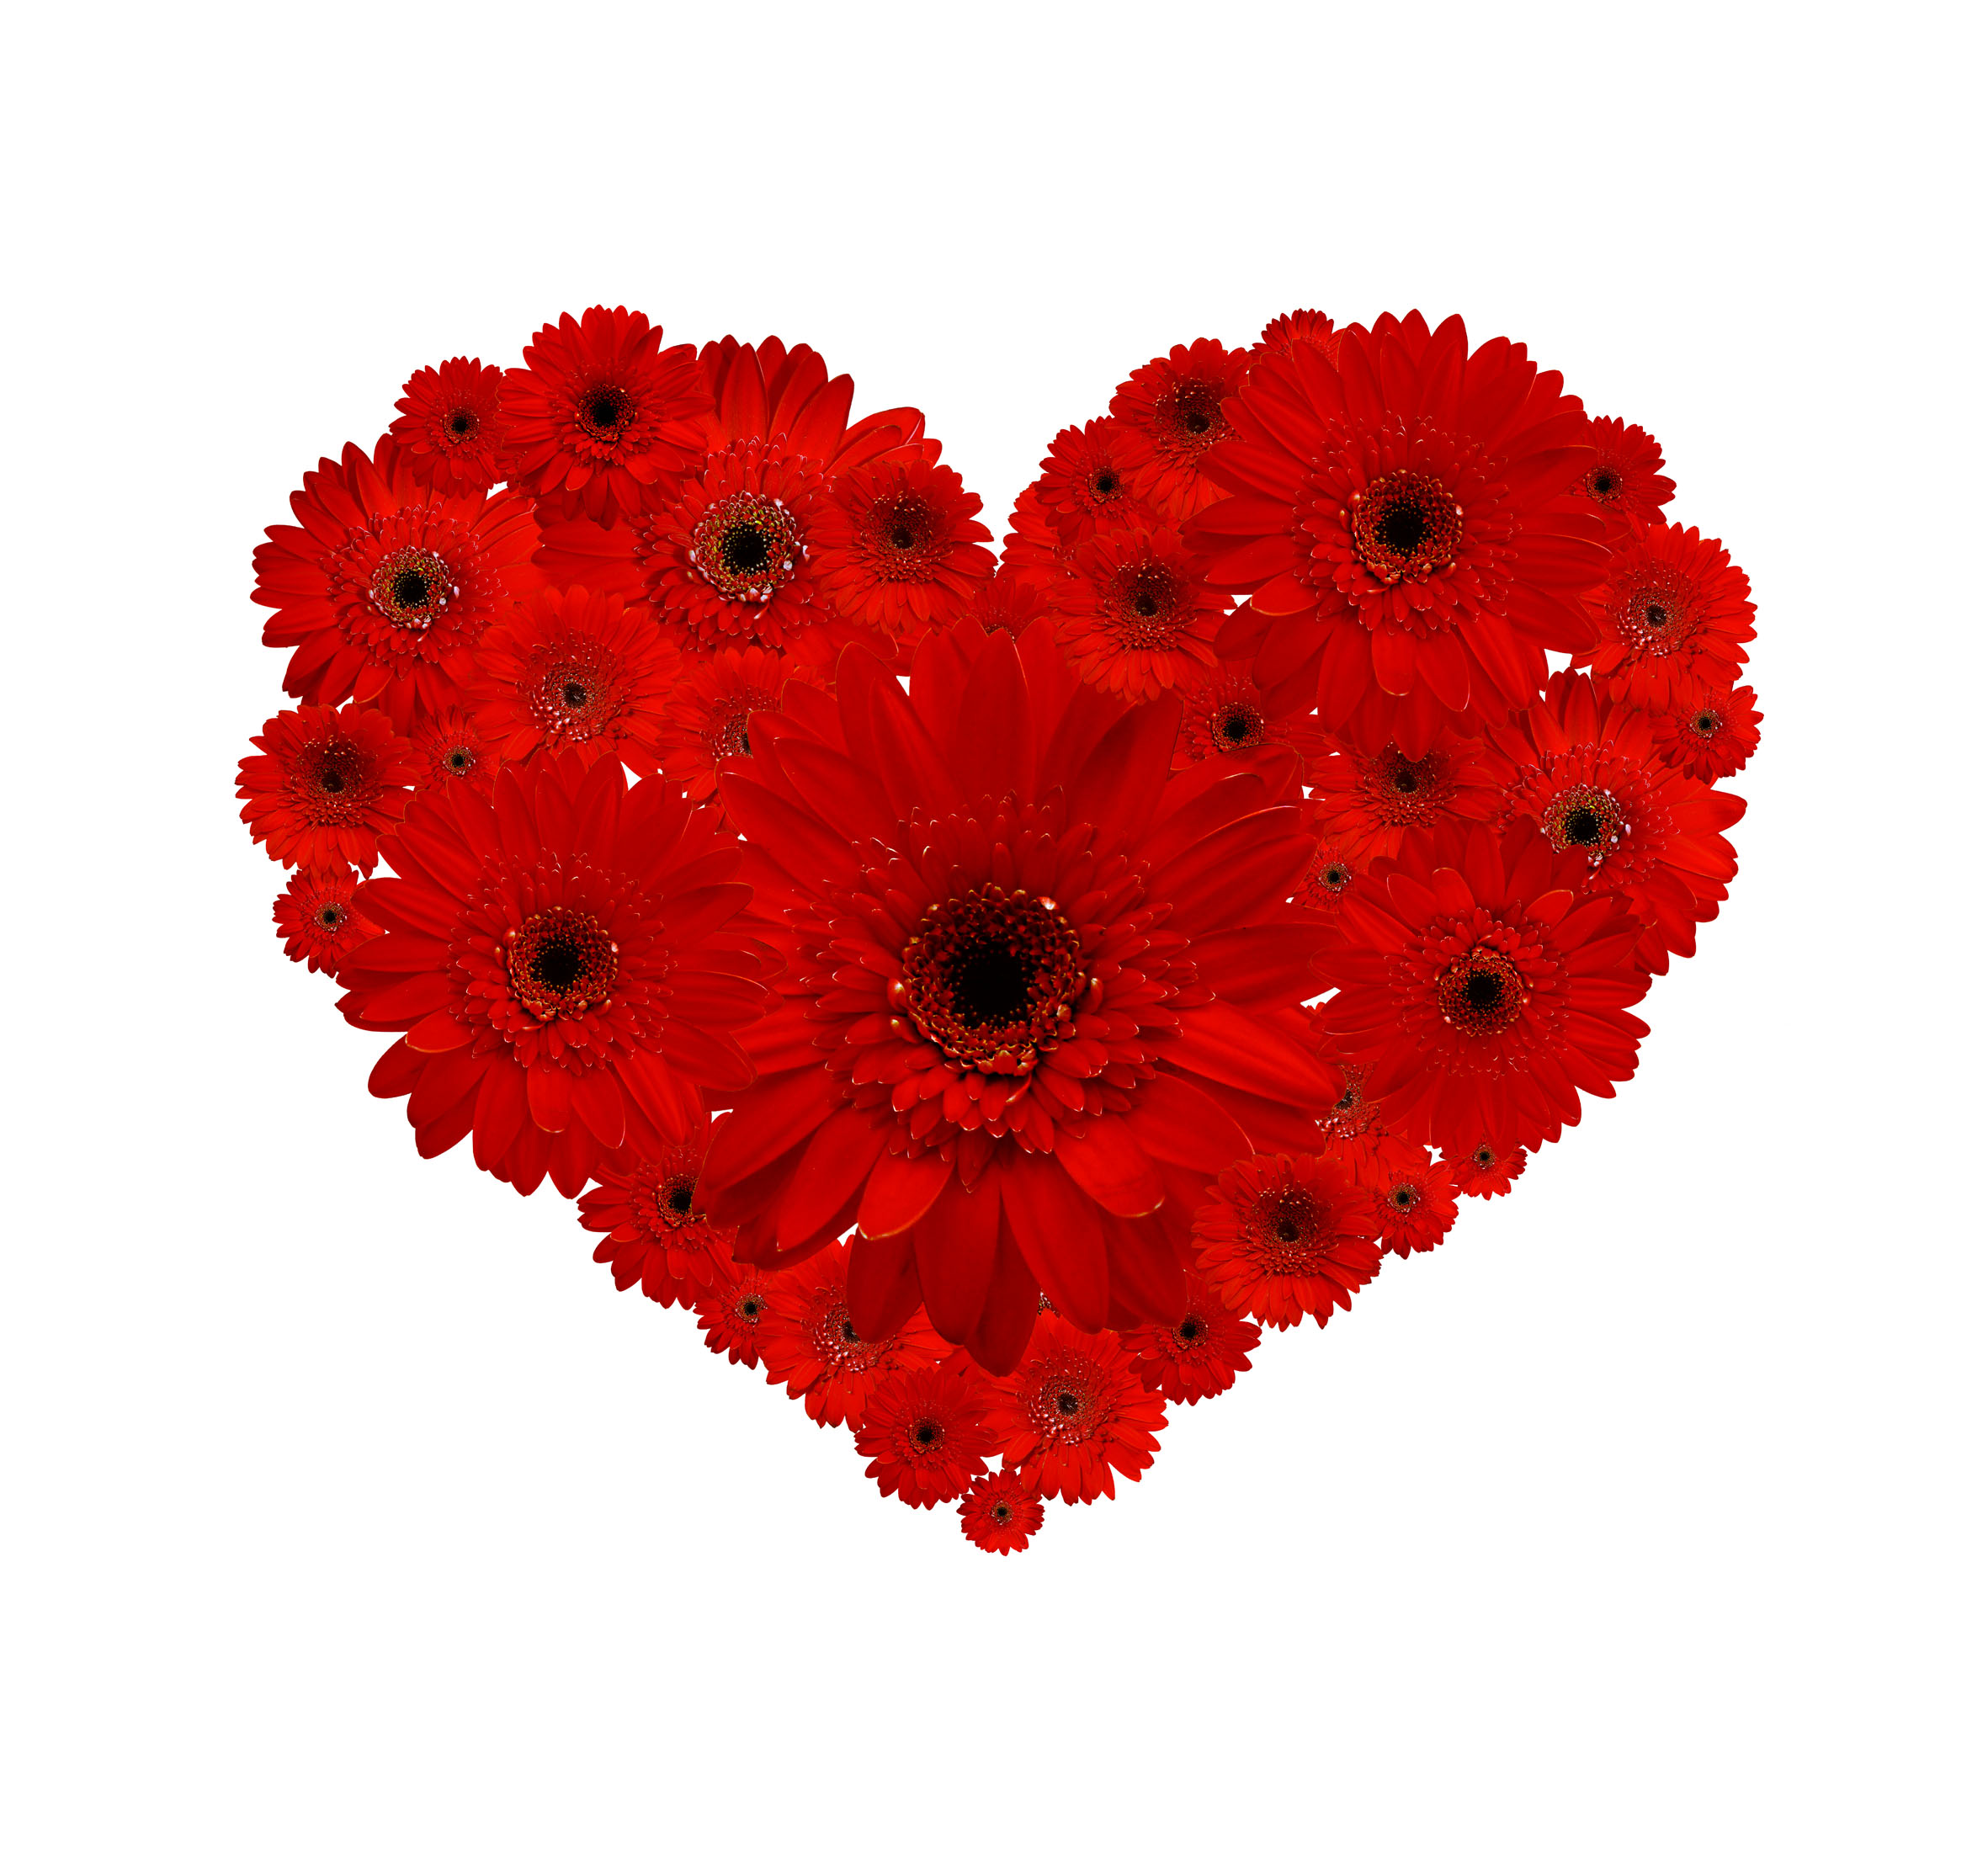 Heart Of Flowers Wallpapers High Quality | Download Free